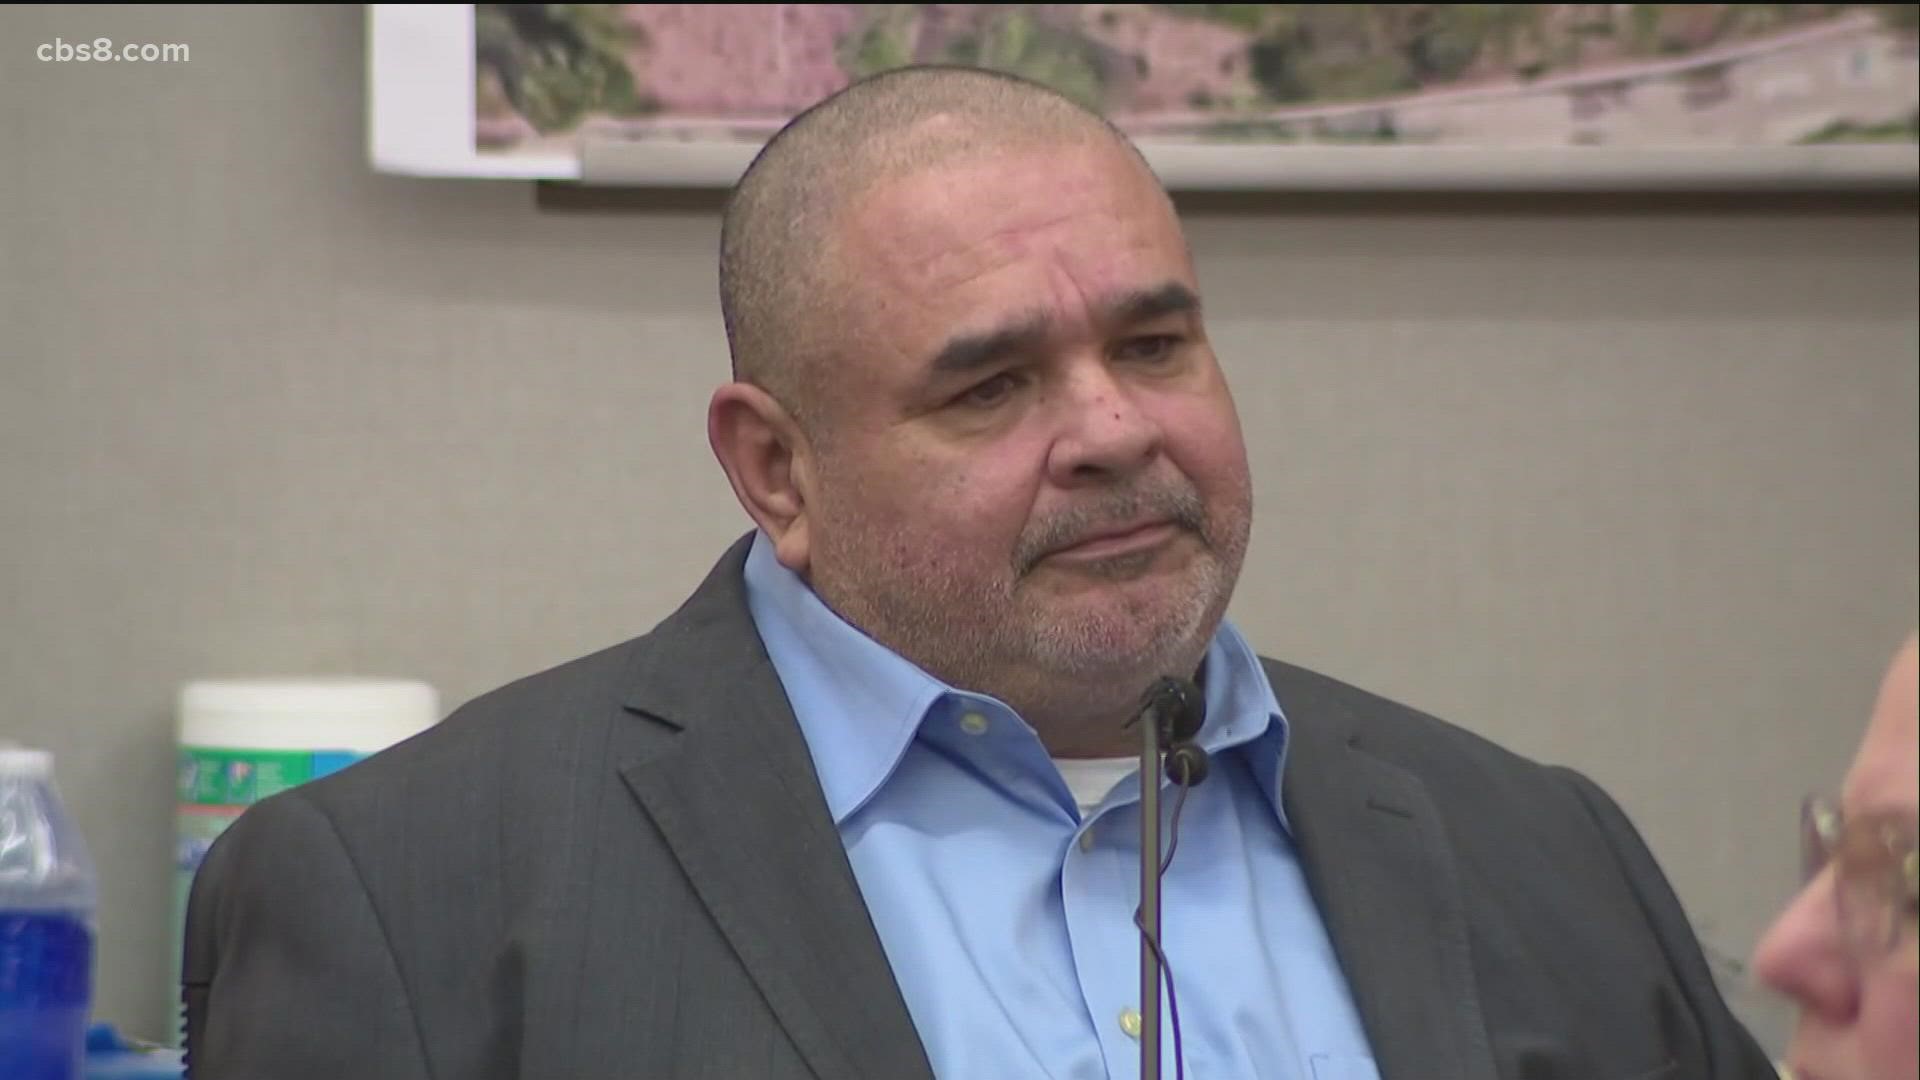 Gomez, who testified on his own behalf, said he did not realize the men who approached him were law enforcement.